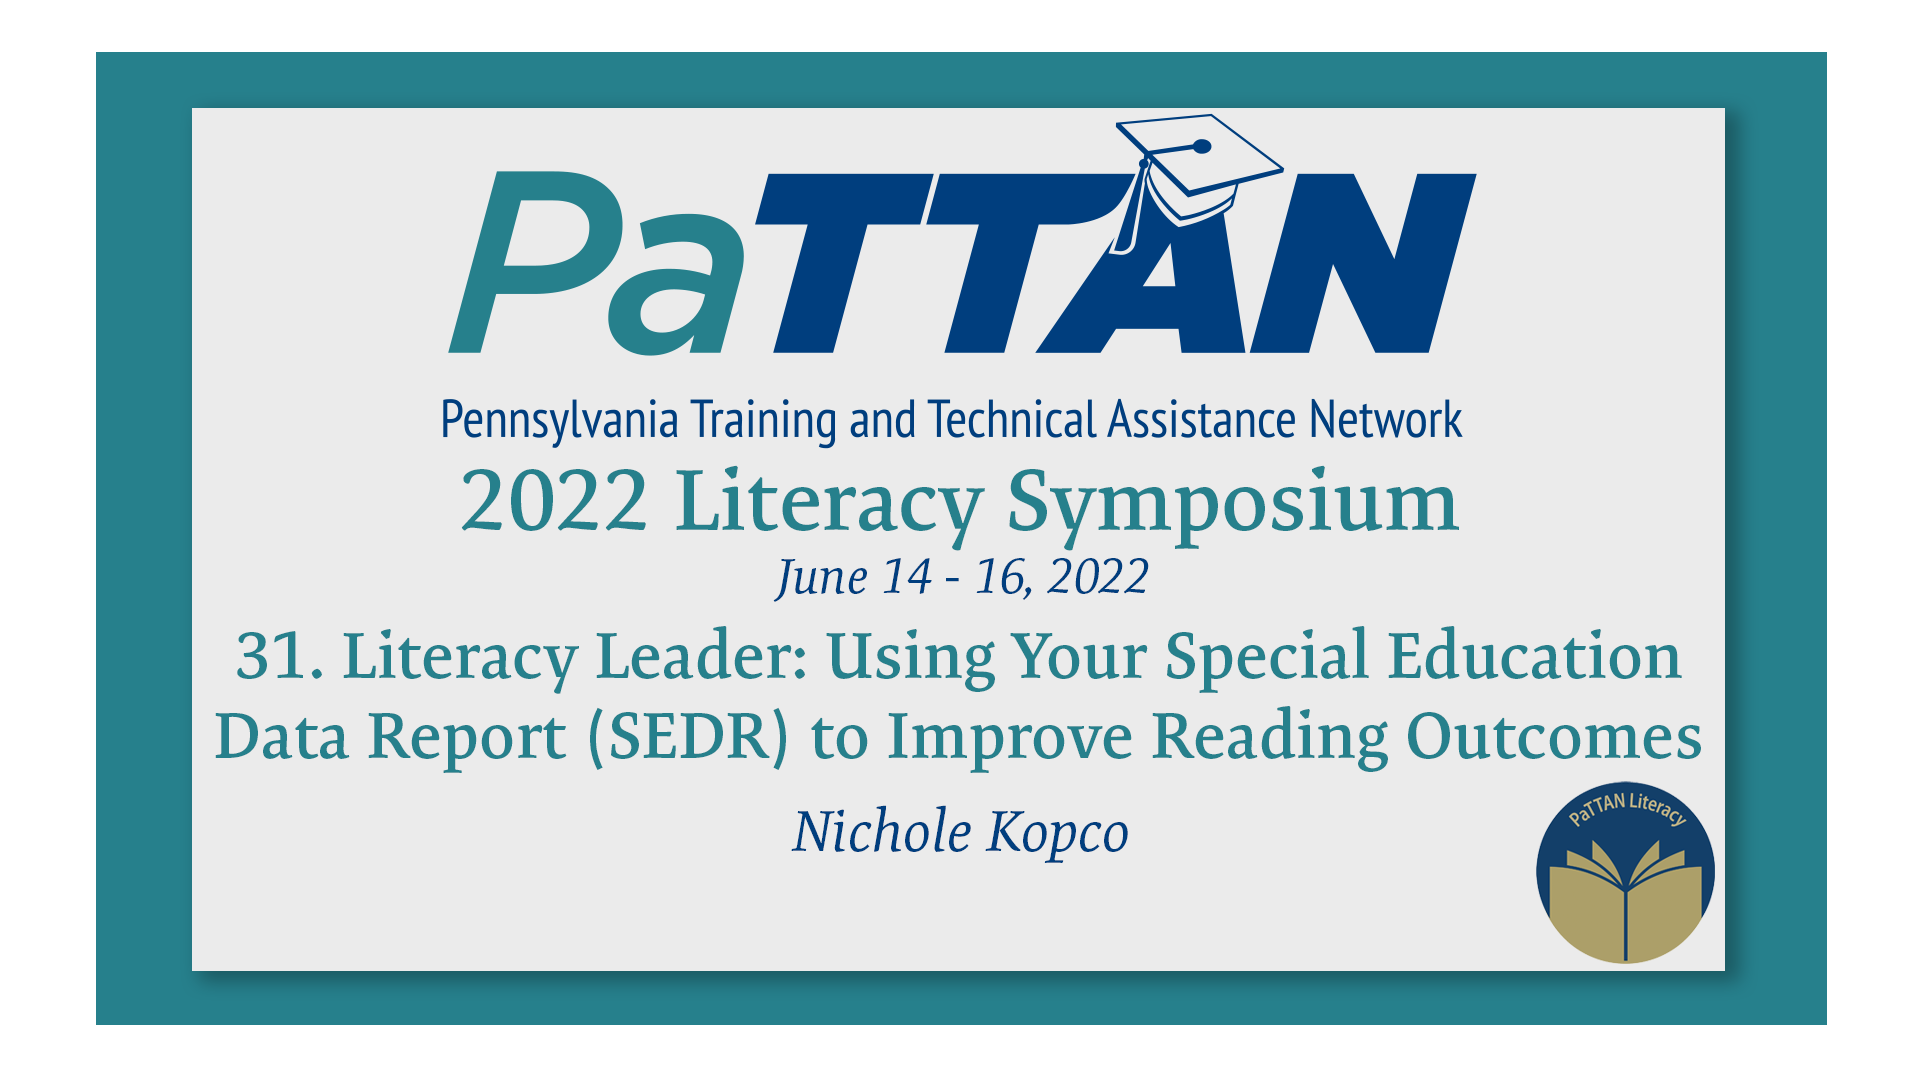 31. Literacy Leader: Using Your SEDR to Improve Reading Outcomes | 2022 Literacy Symposium